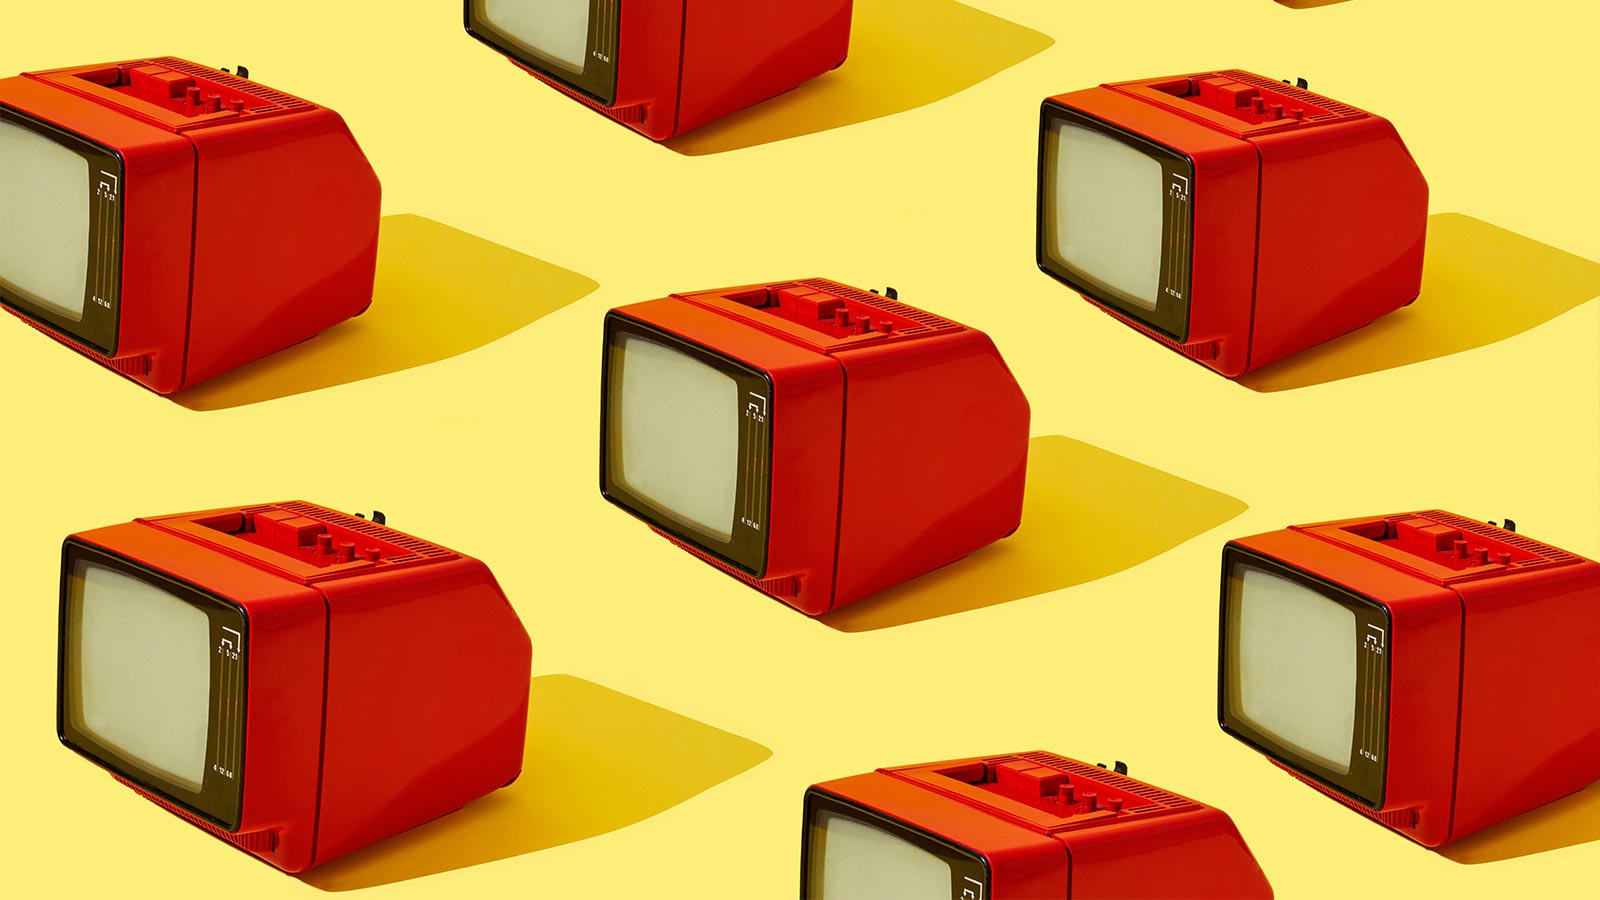 some red old analog television sets arranged in different lineas on a yellow background